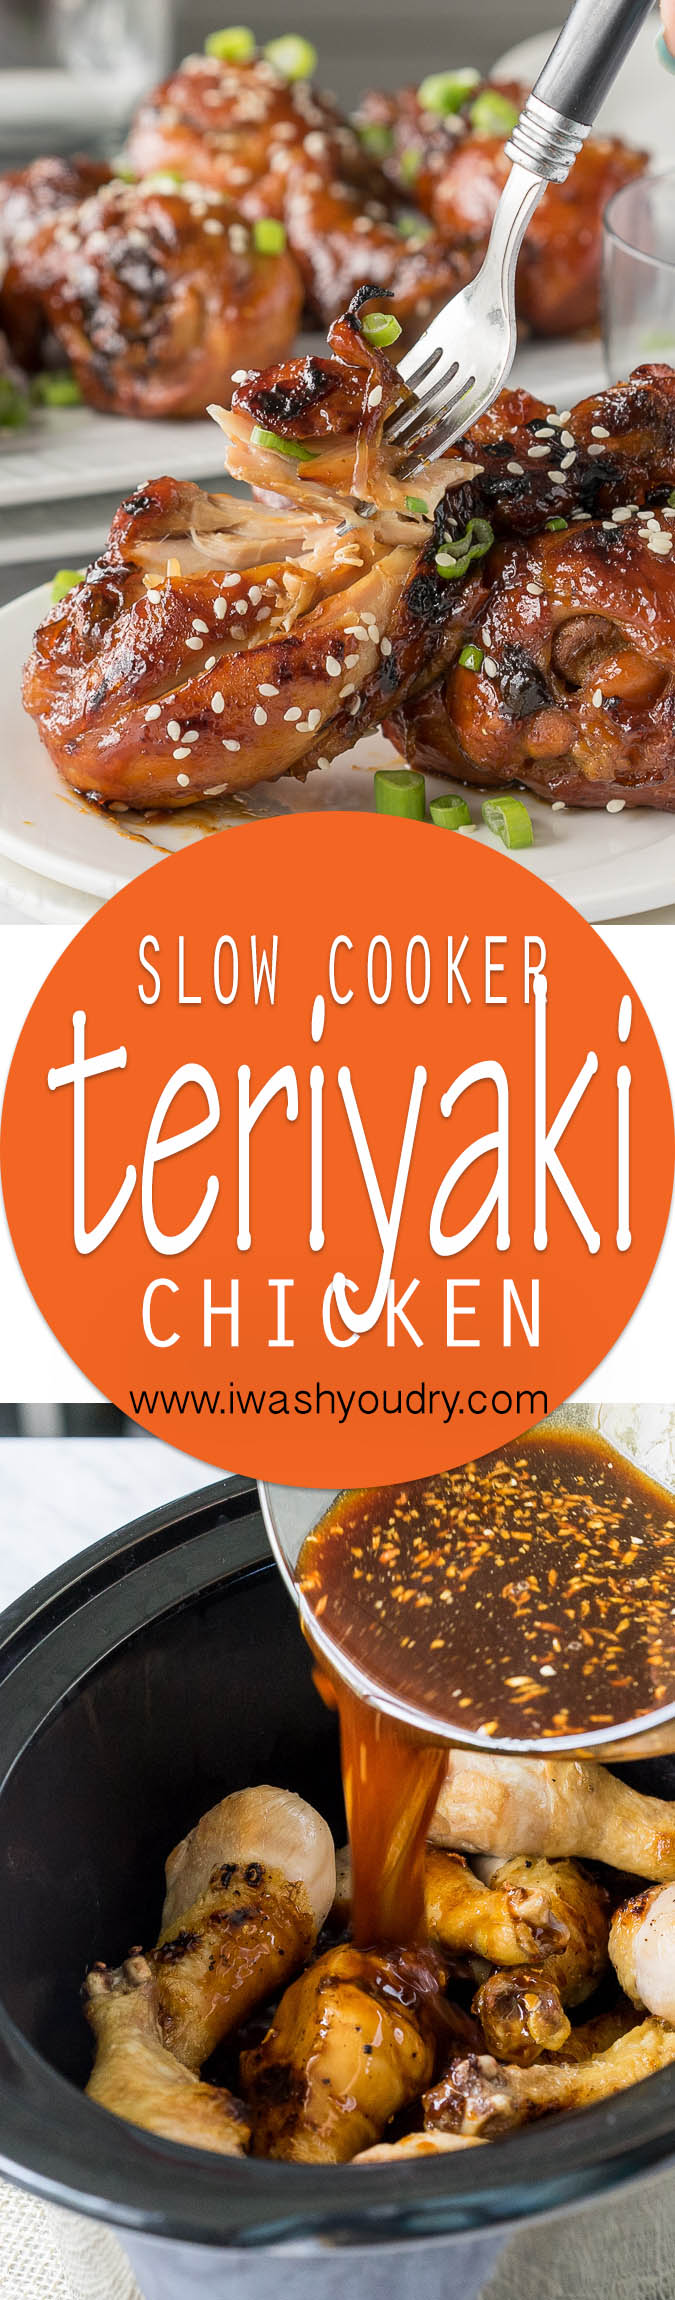 This Slow Cooker Teriyaki Chicken recipe is super quick and results in better than take-out flavors! 